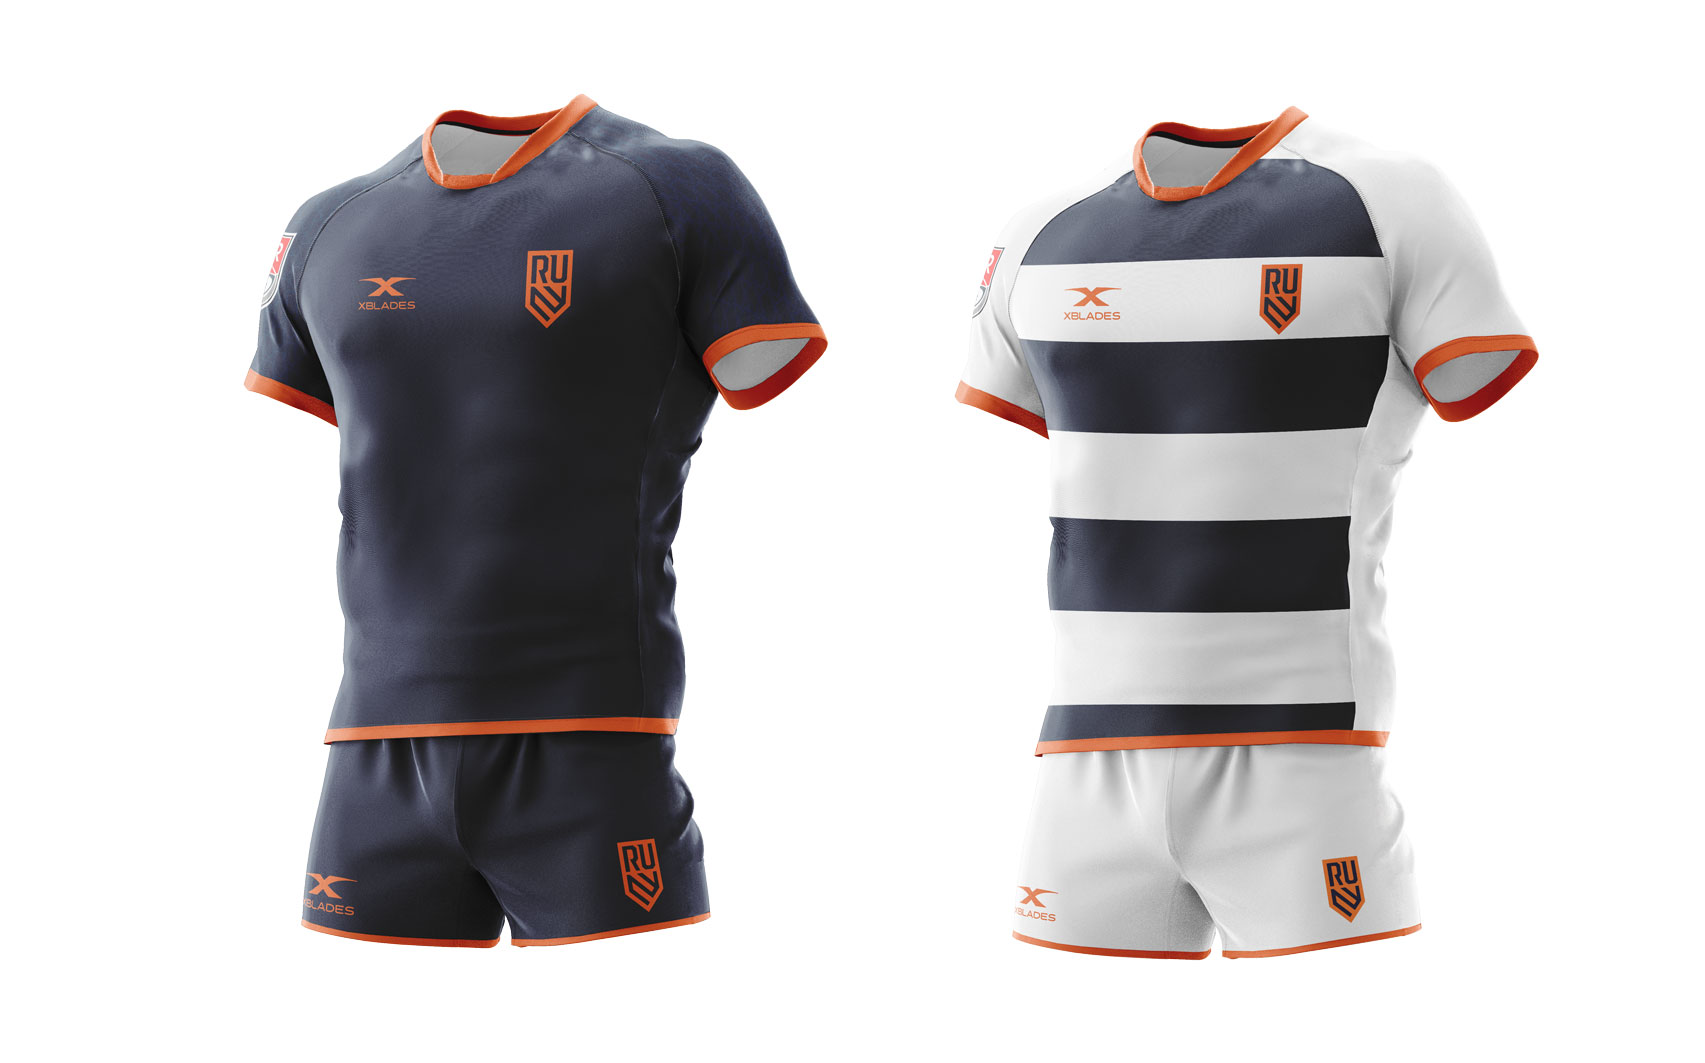 rugby united new york jersey